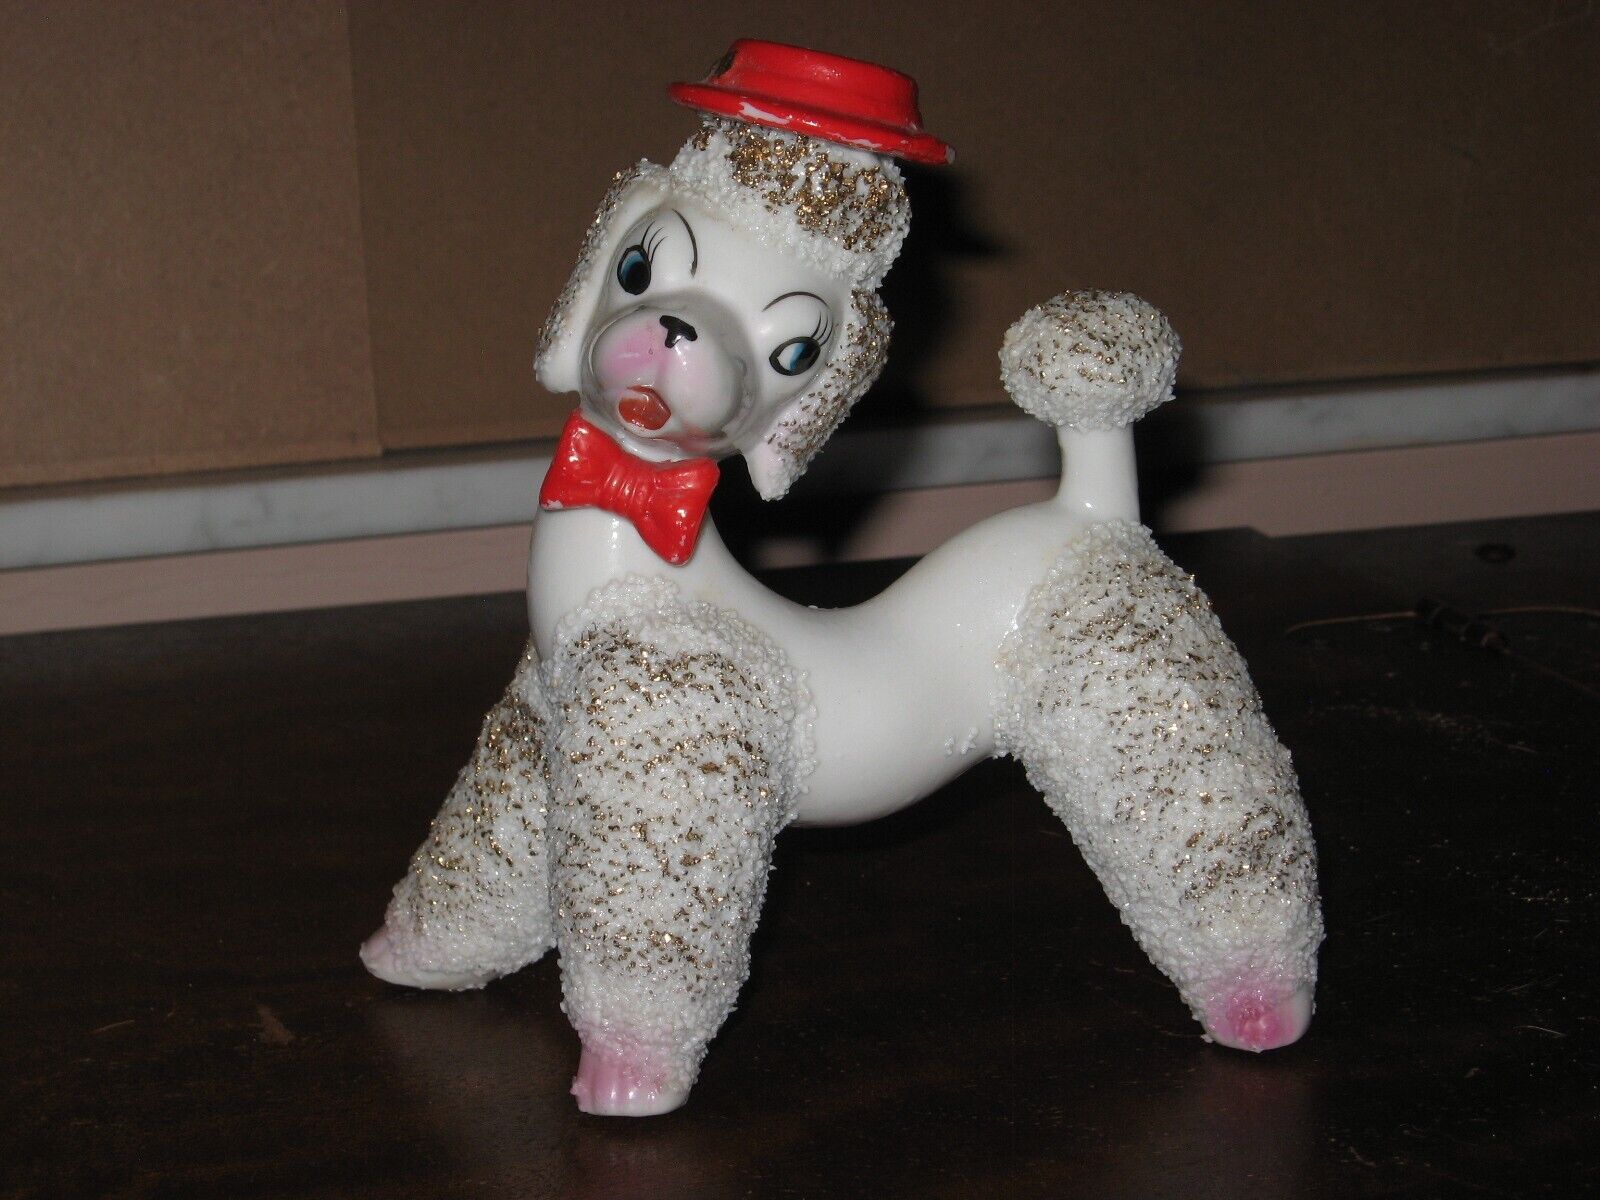 Vintage spaghetti like white poodle with gold leaf highlights and red hat